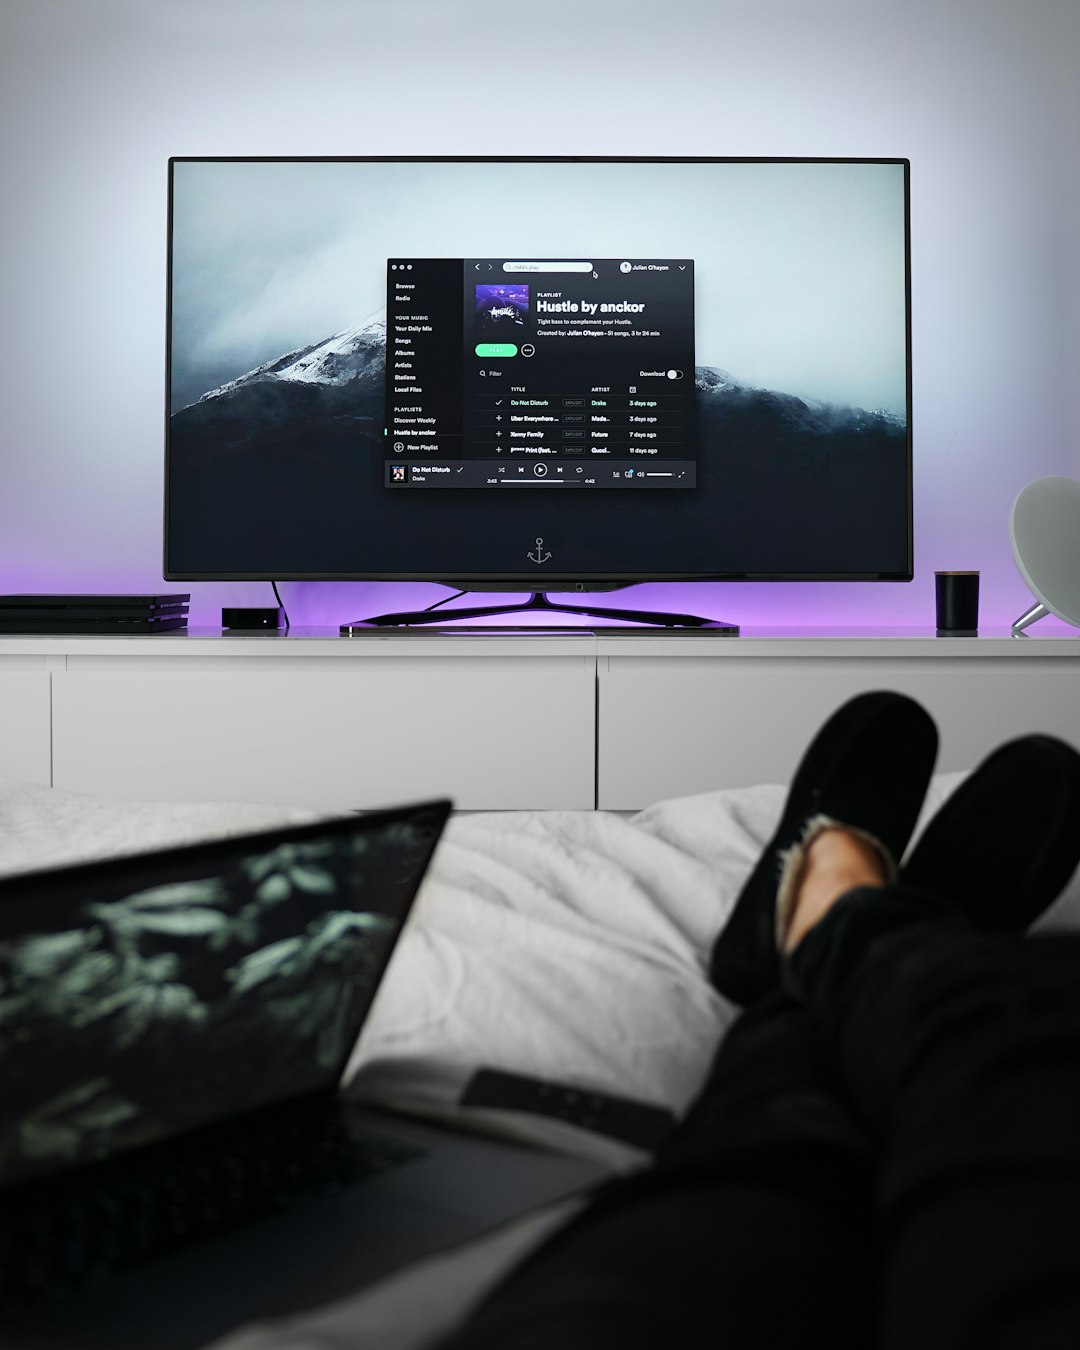 Person relaxing on bed with slippers listening to spotify through a television screen on a dresser